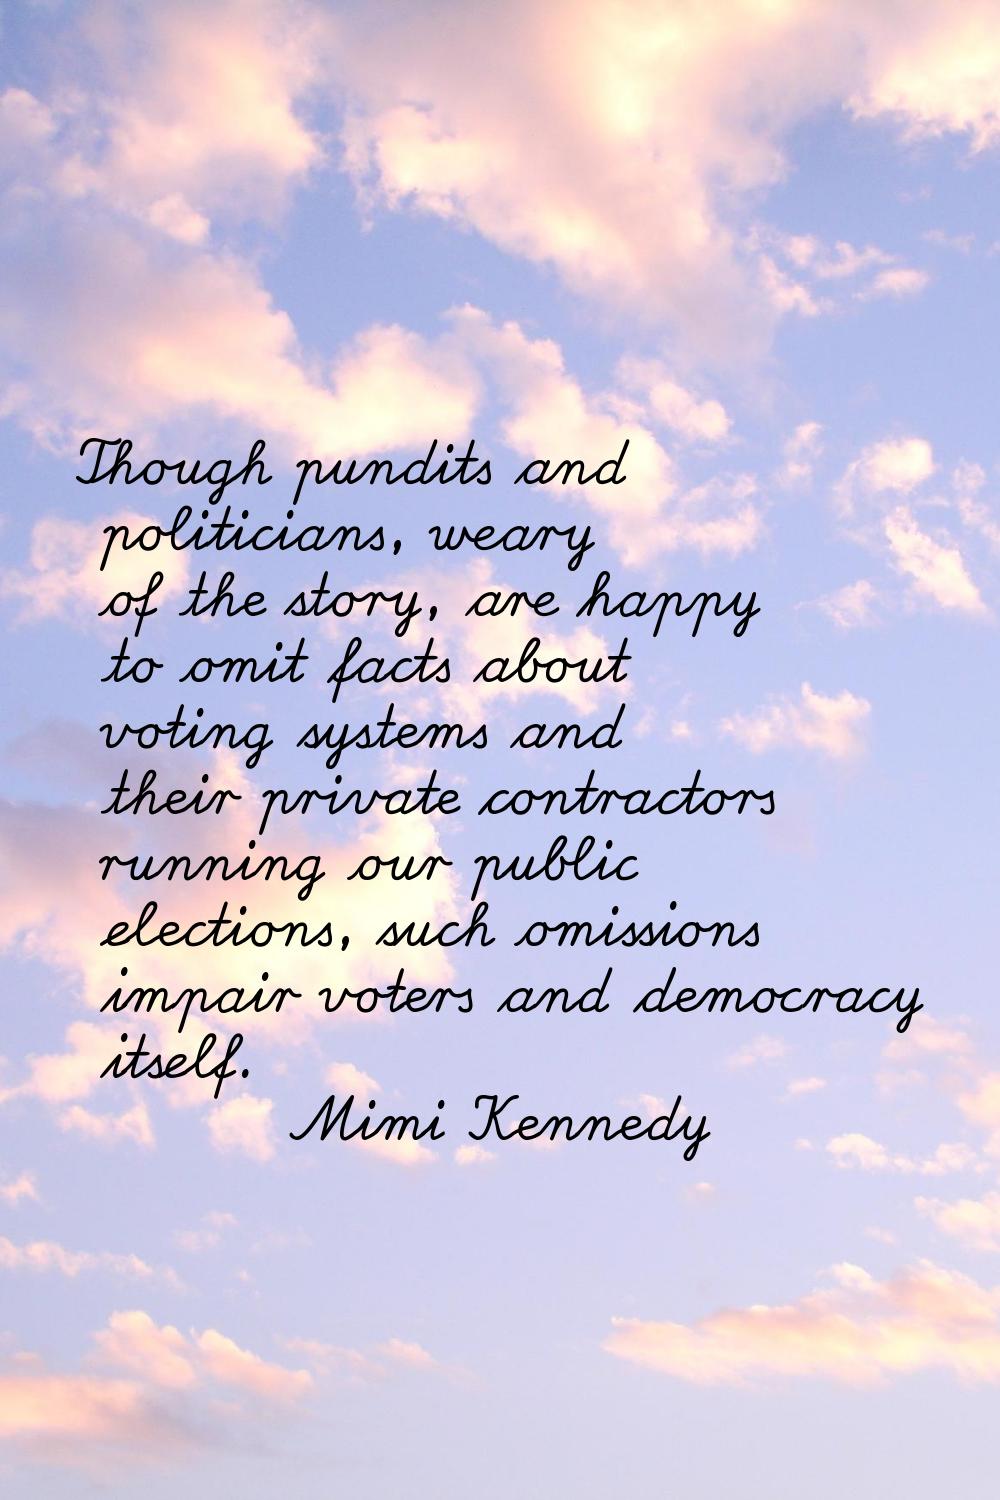 Though pundits and politicians, weary of the story, are happy to omit facts about voting systems an